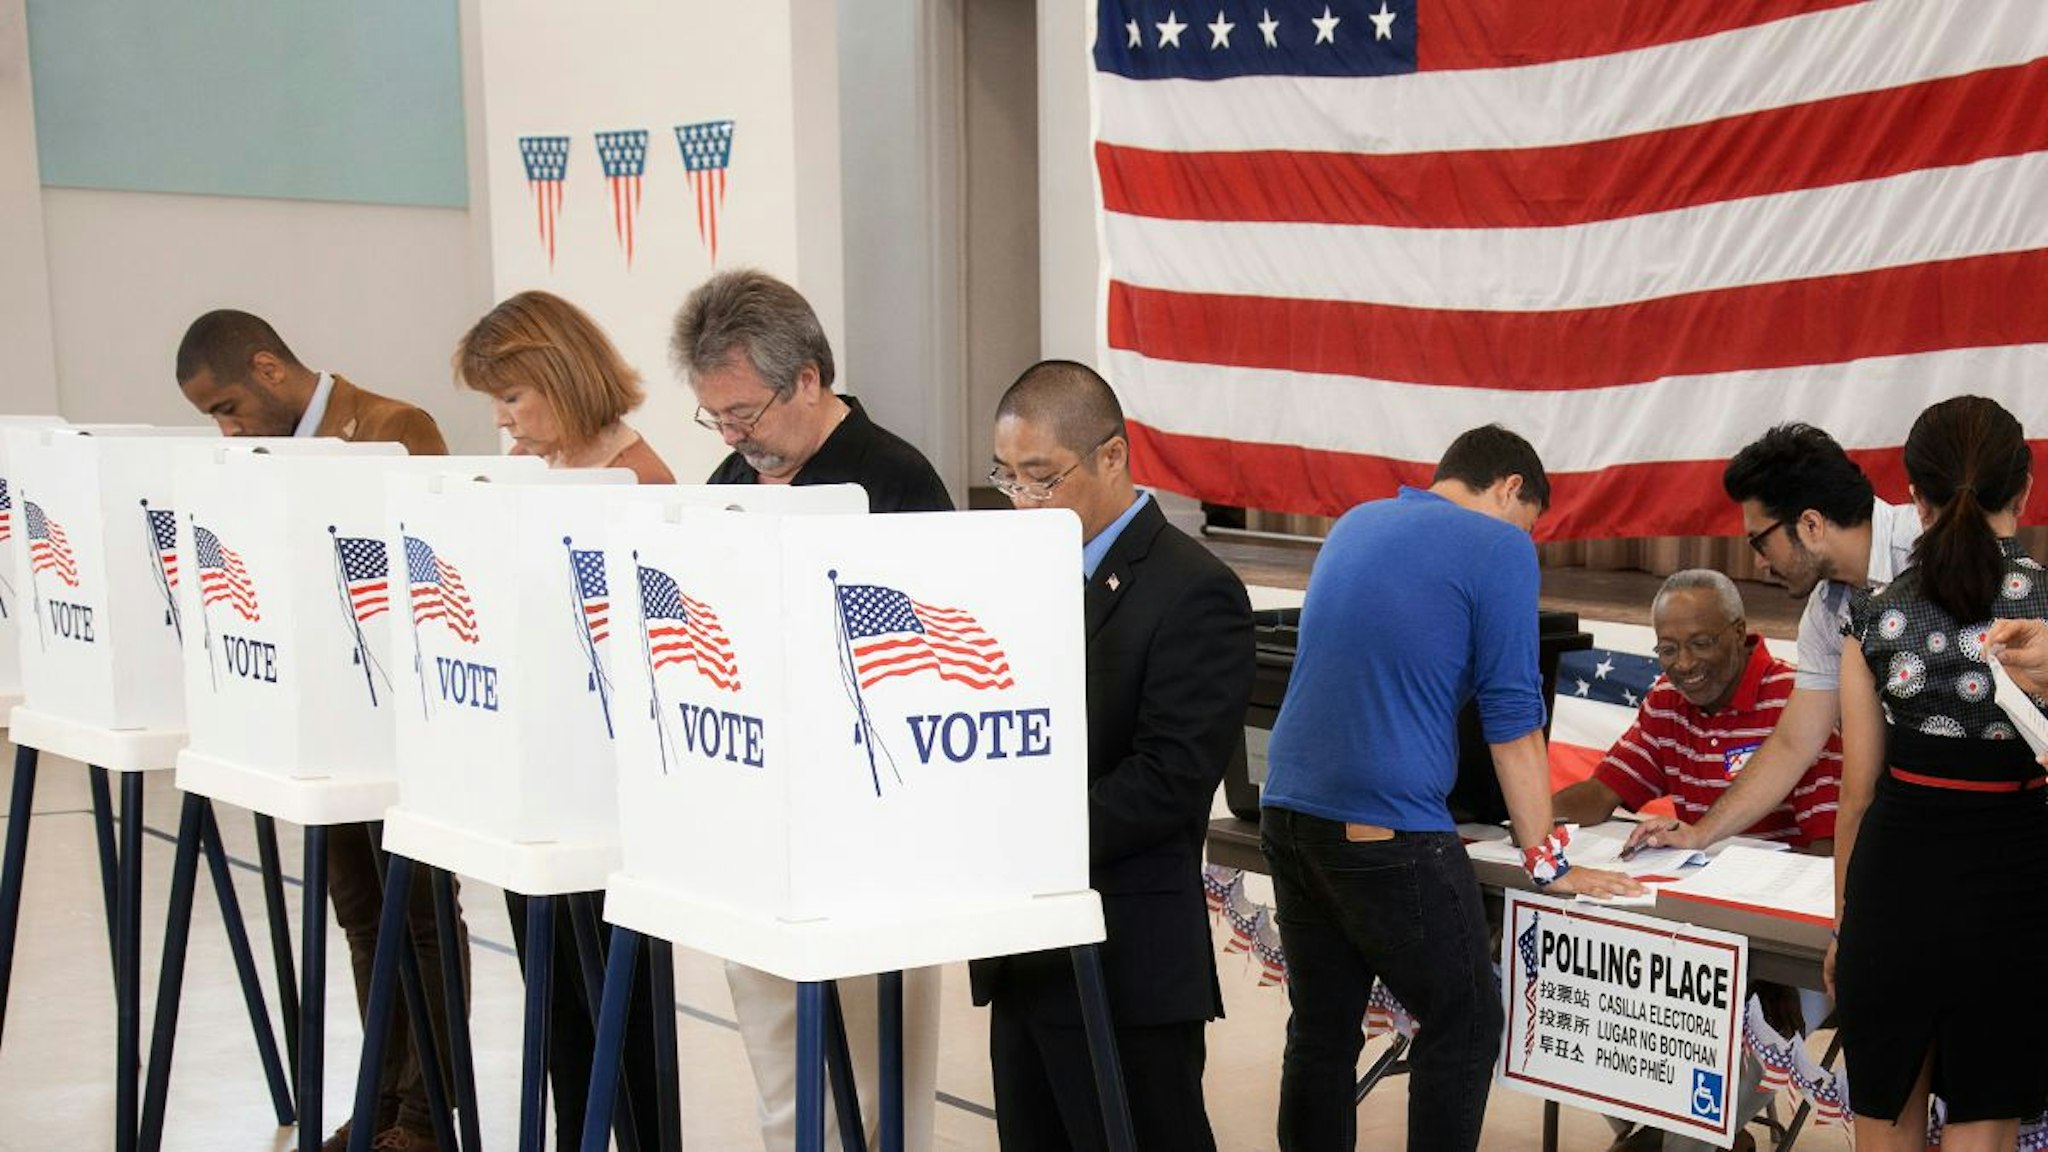 People voting in polling place - stock photo.